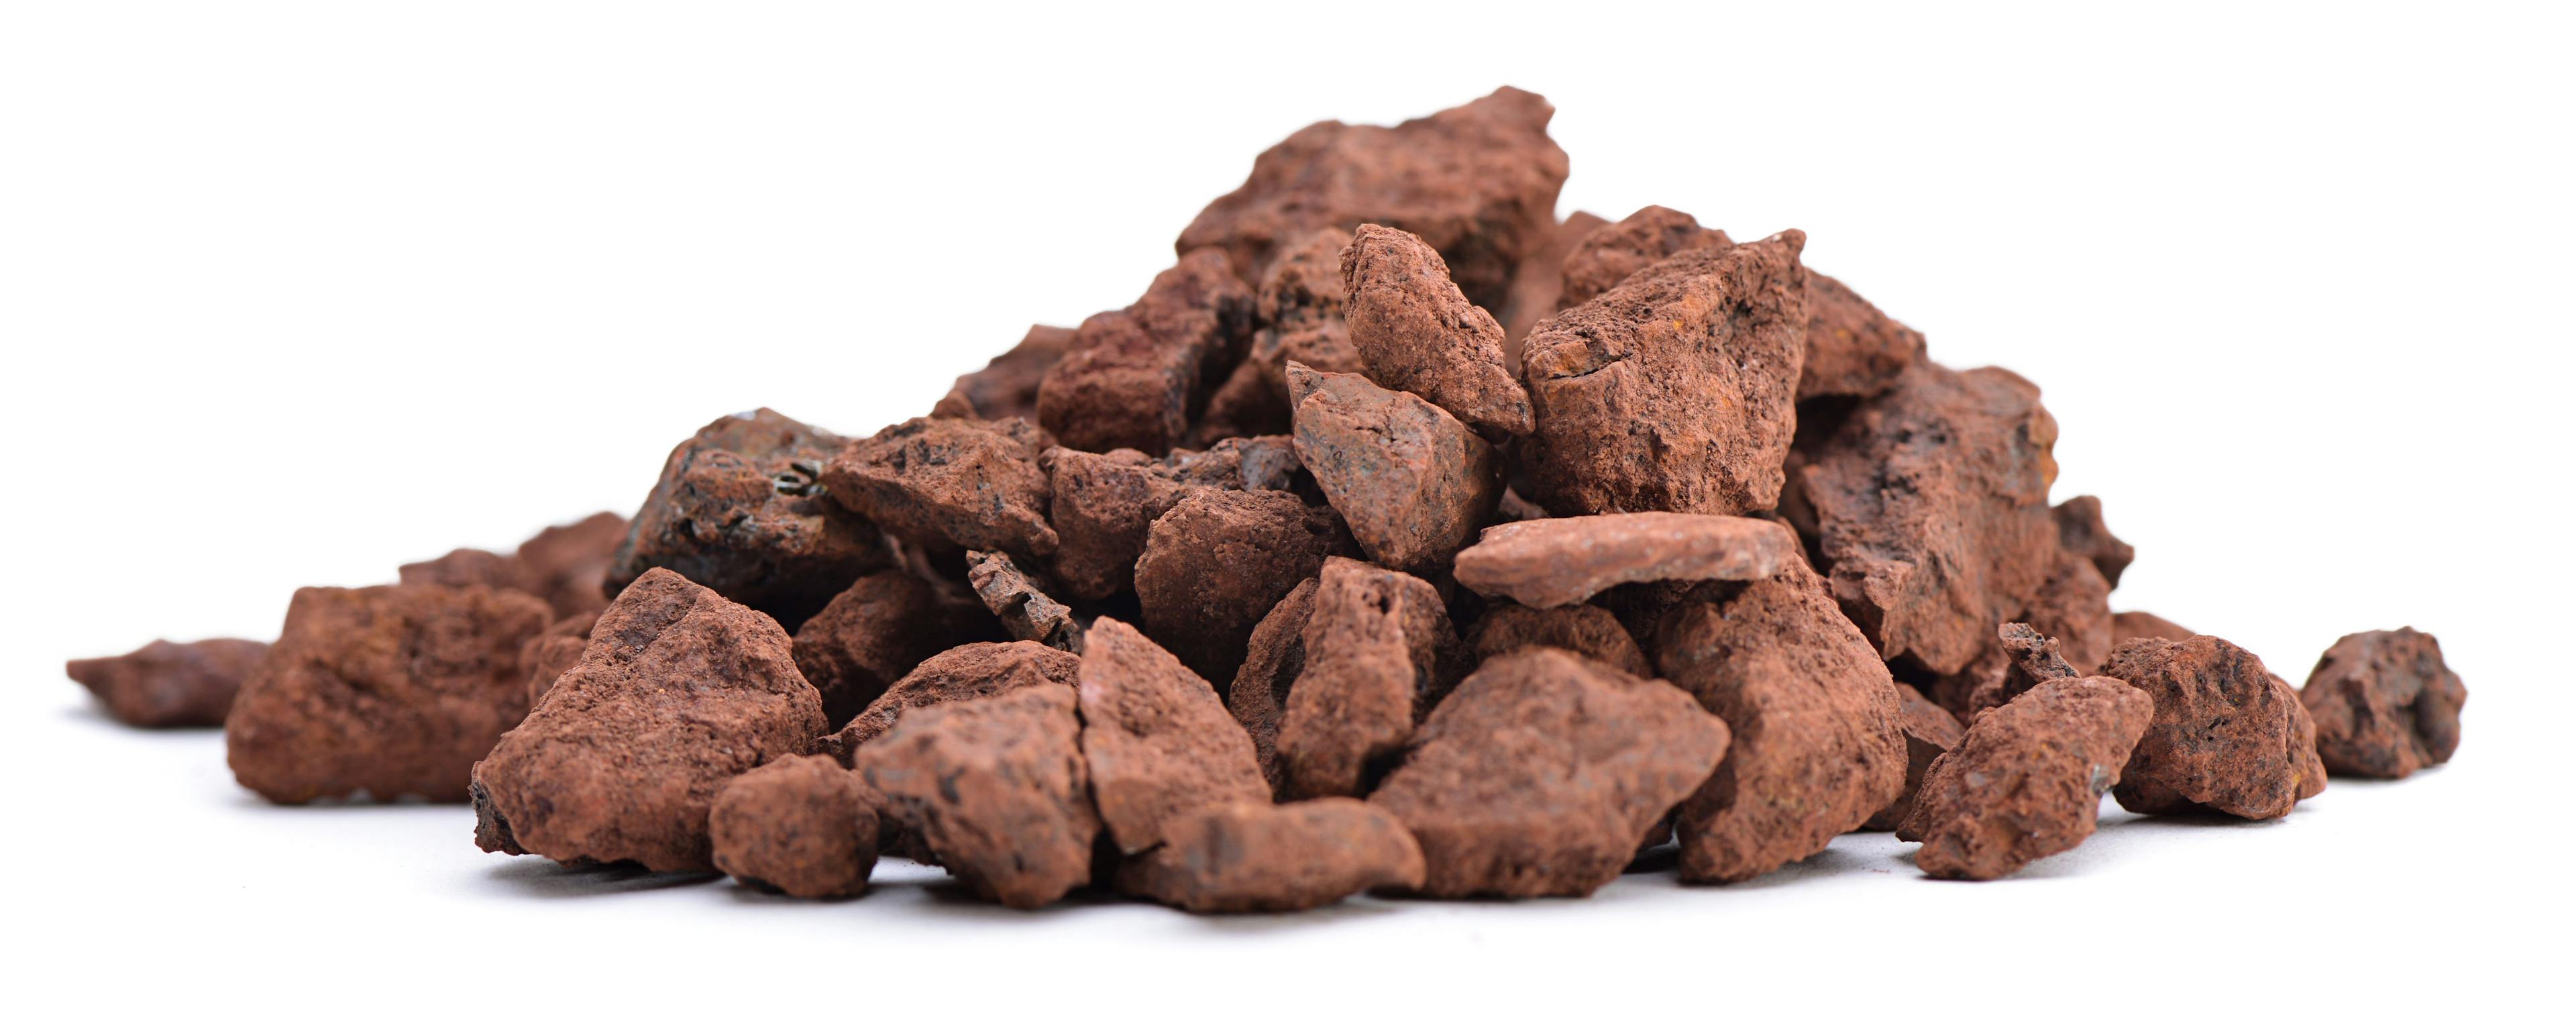 Heap of natural iron ore isolated on white background | Image Credit: © uwimages - stock.adobe.com